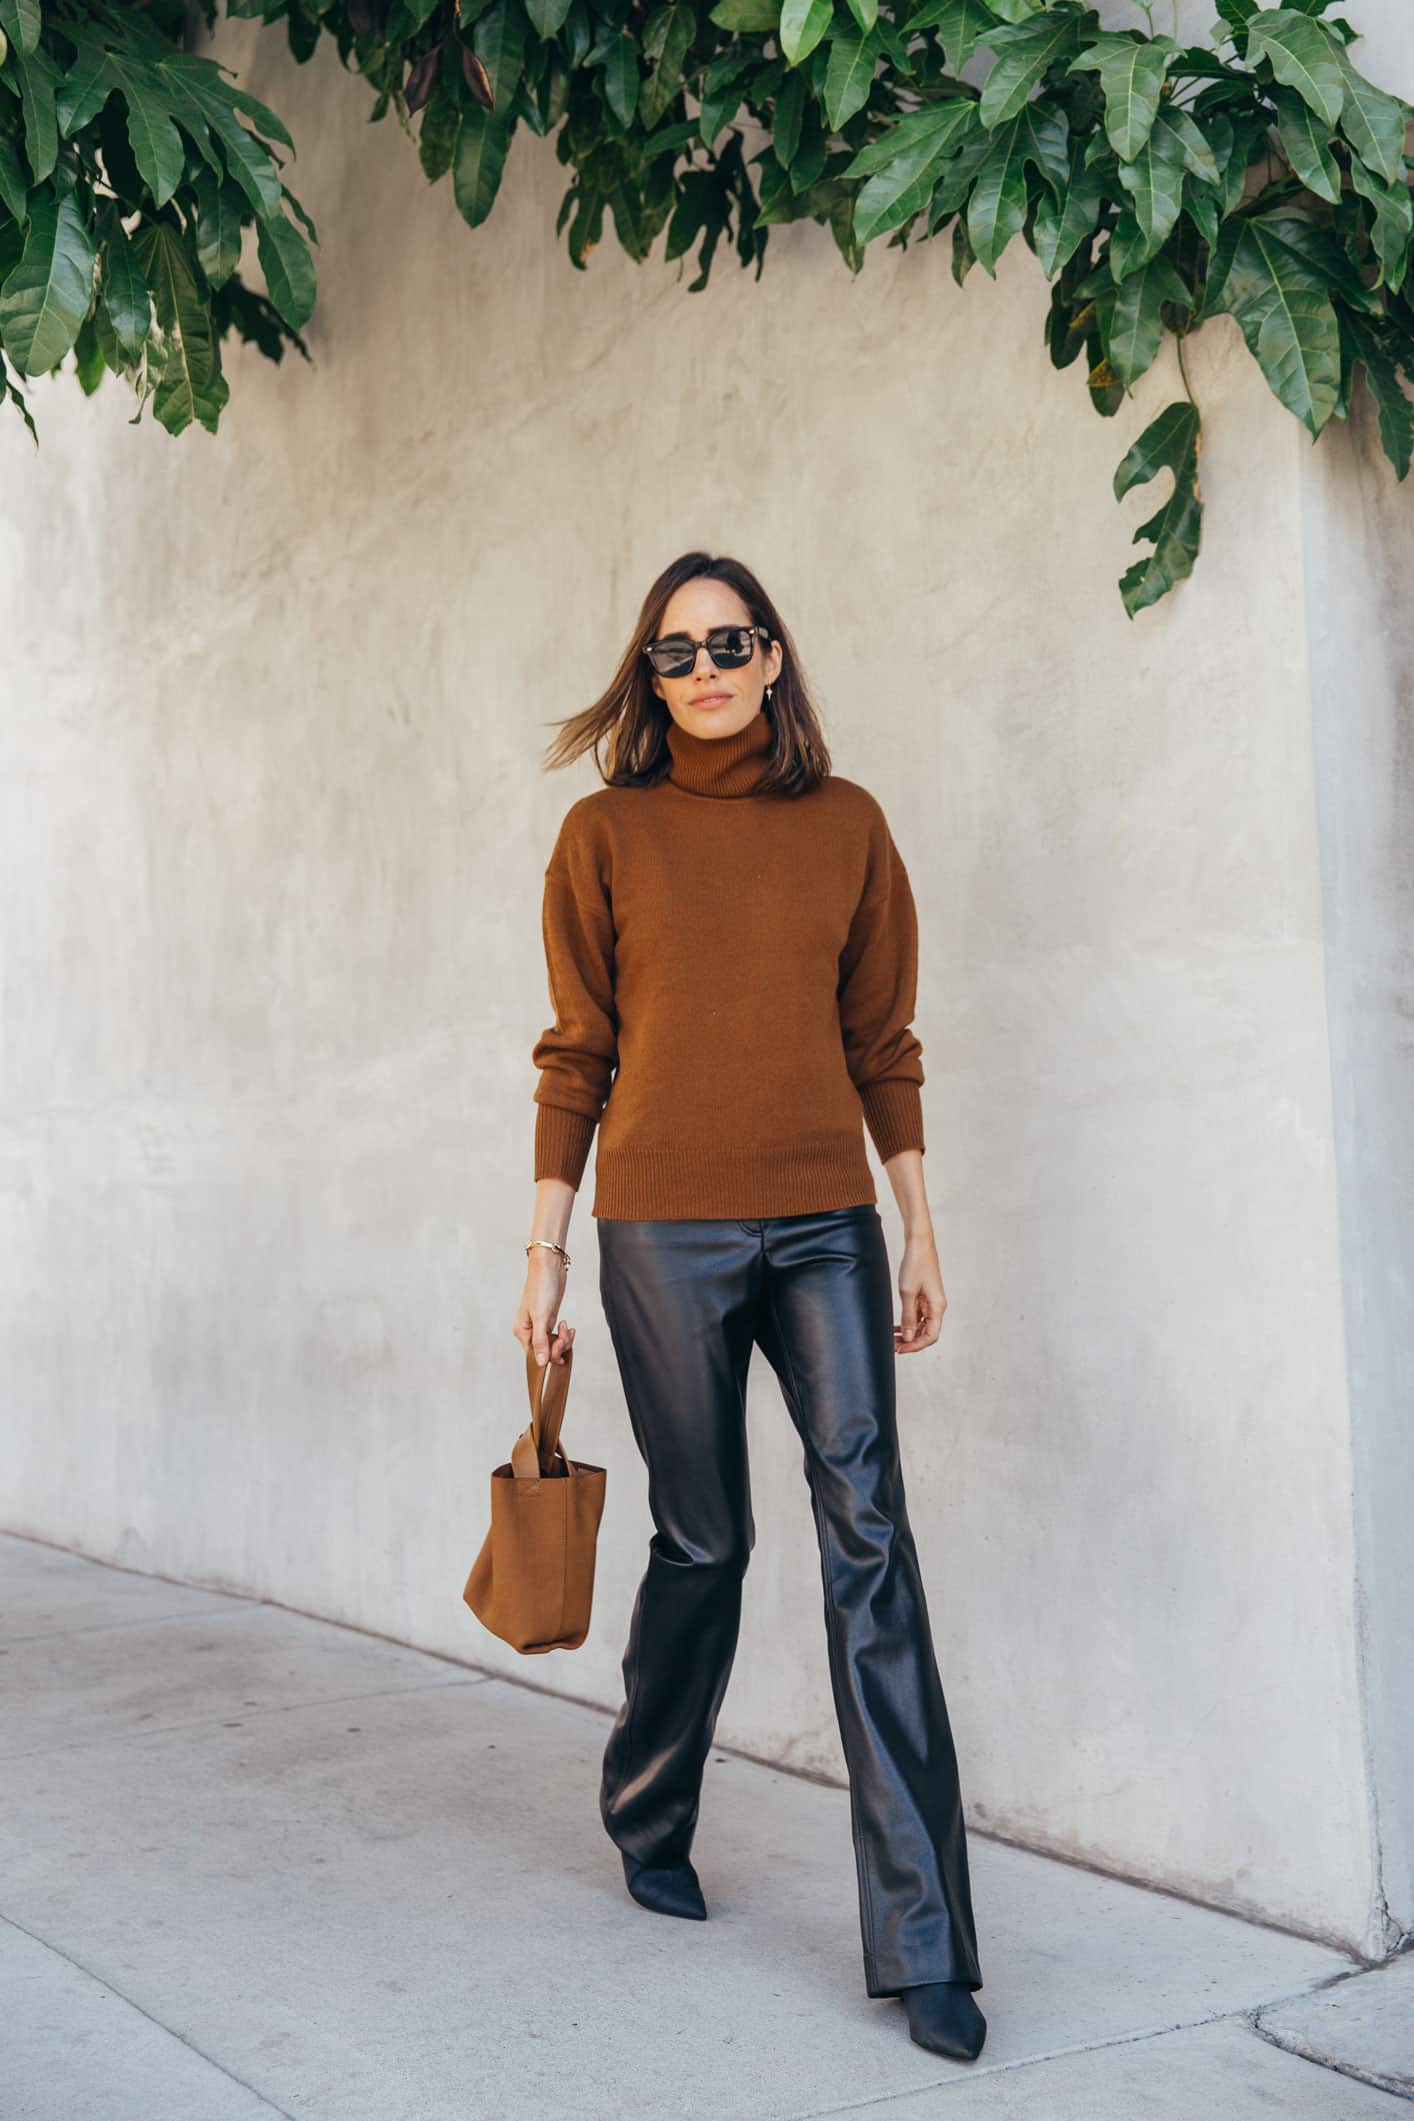 Louise Roe wearing theory leather trousers and camel sweater fall outfit